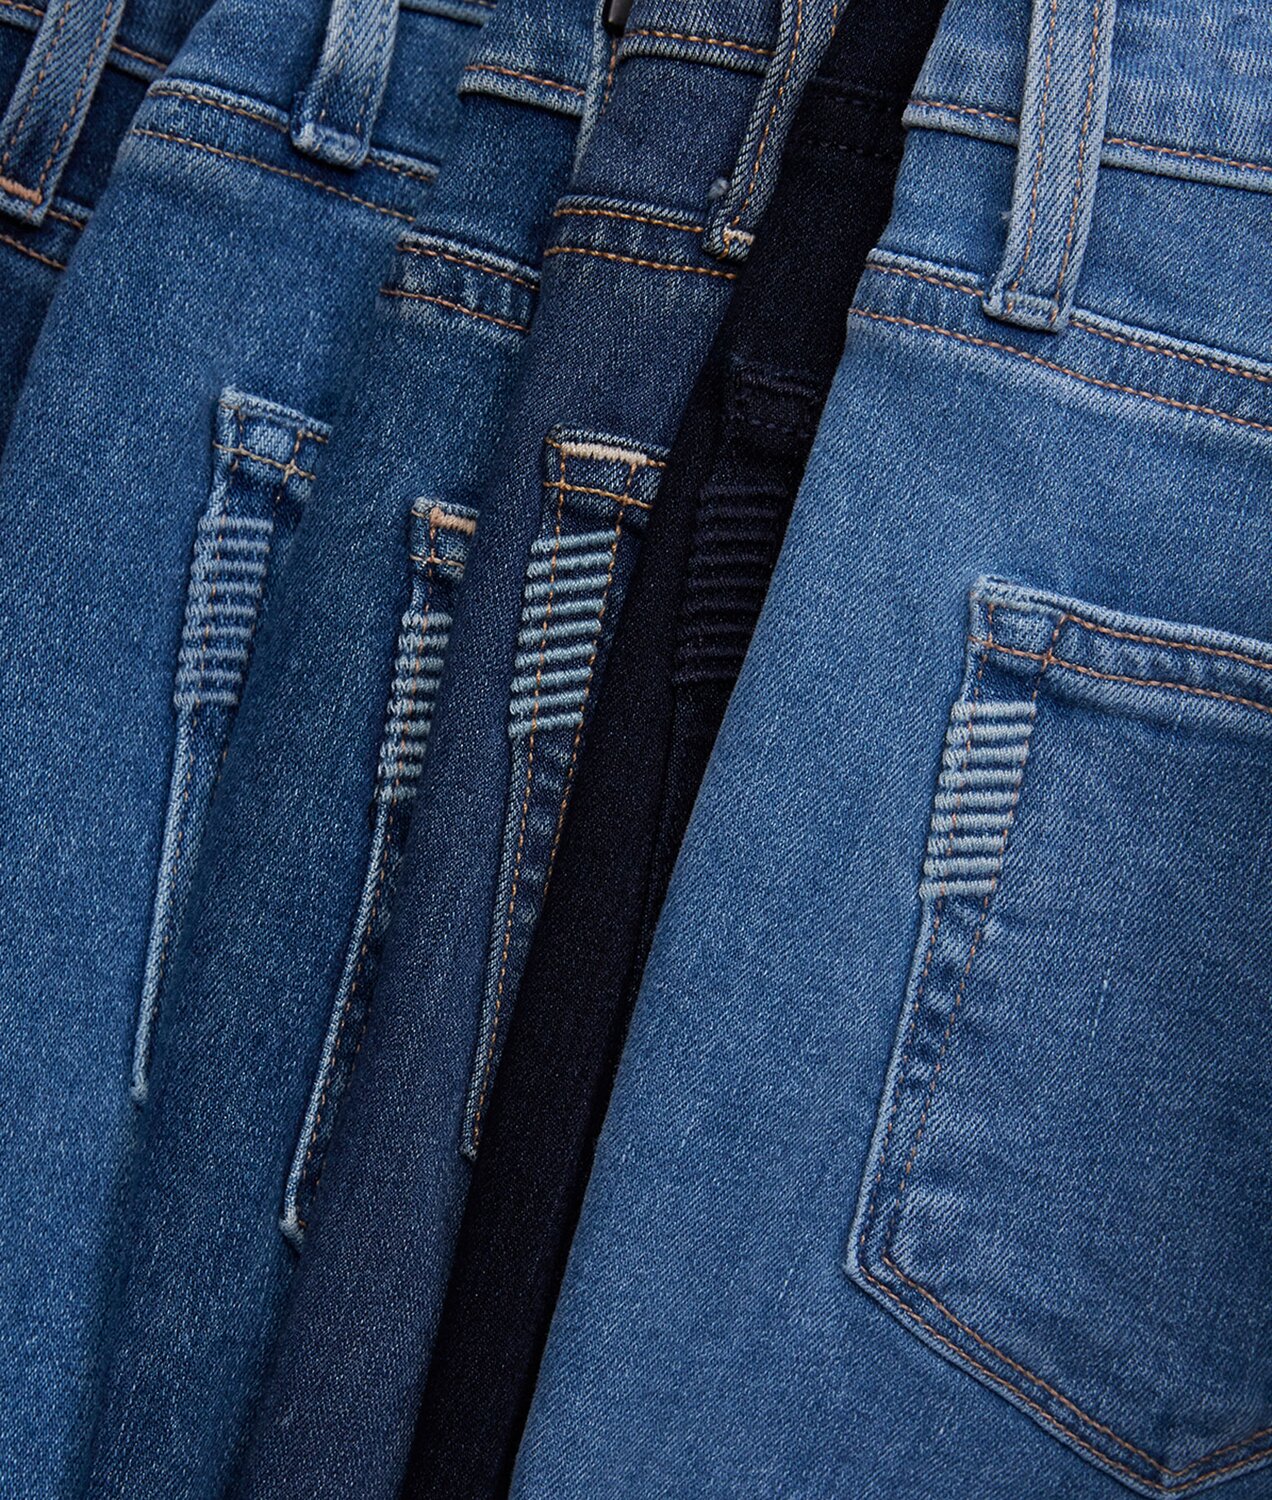 Stack of denim in a range of washes